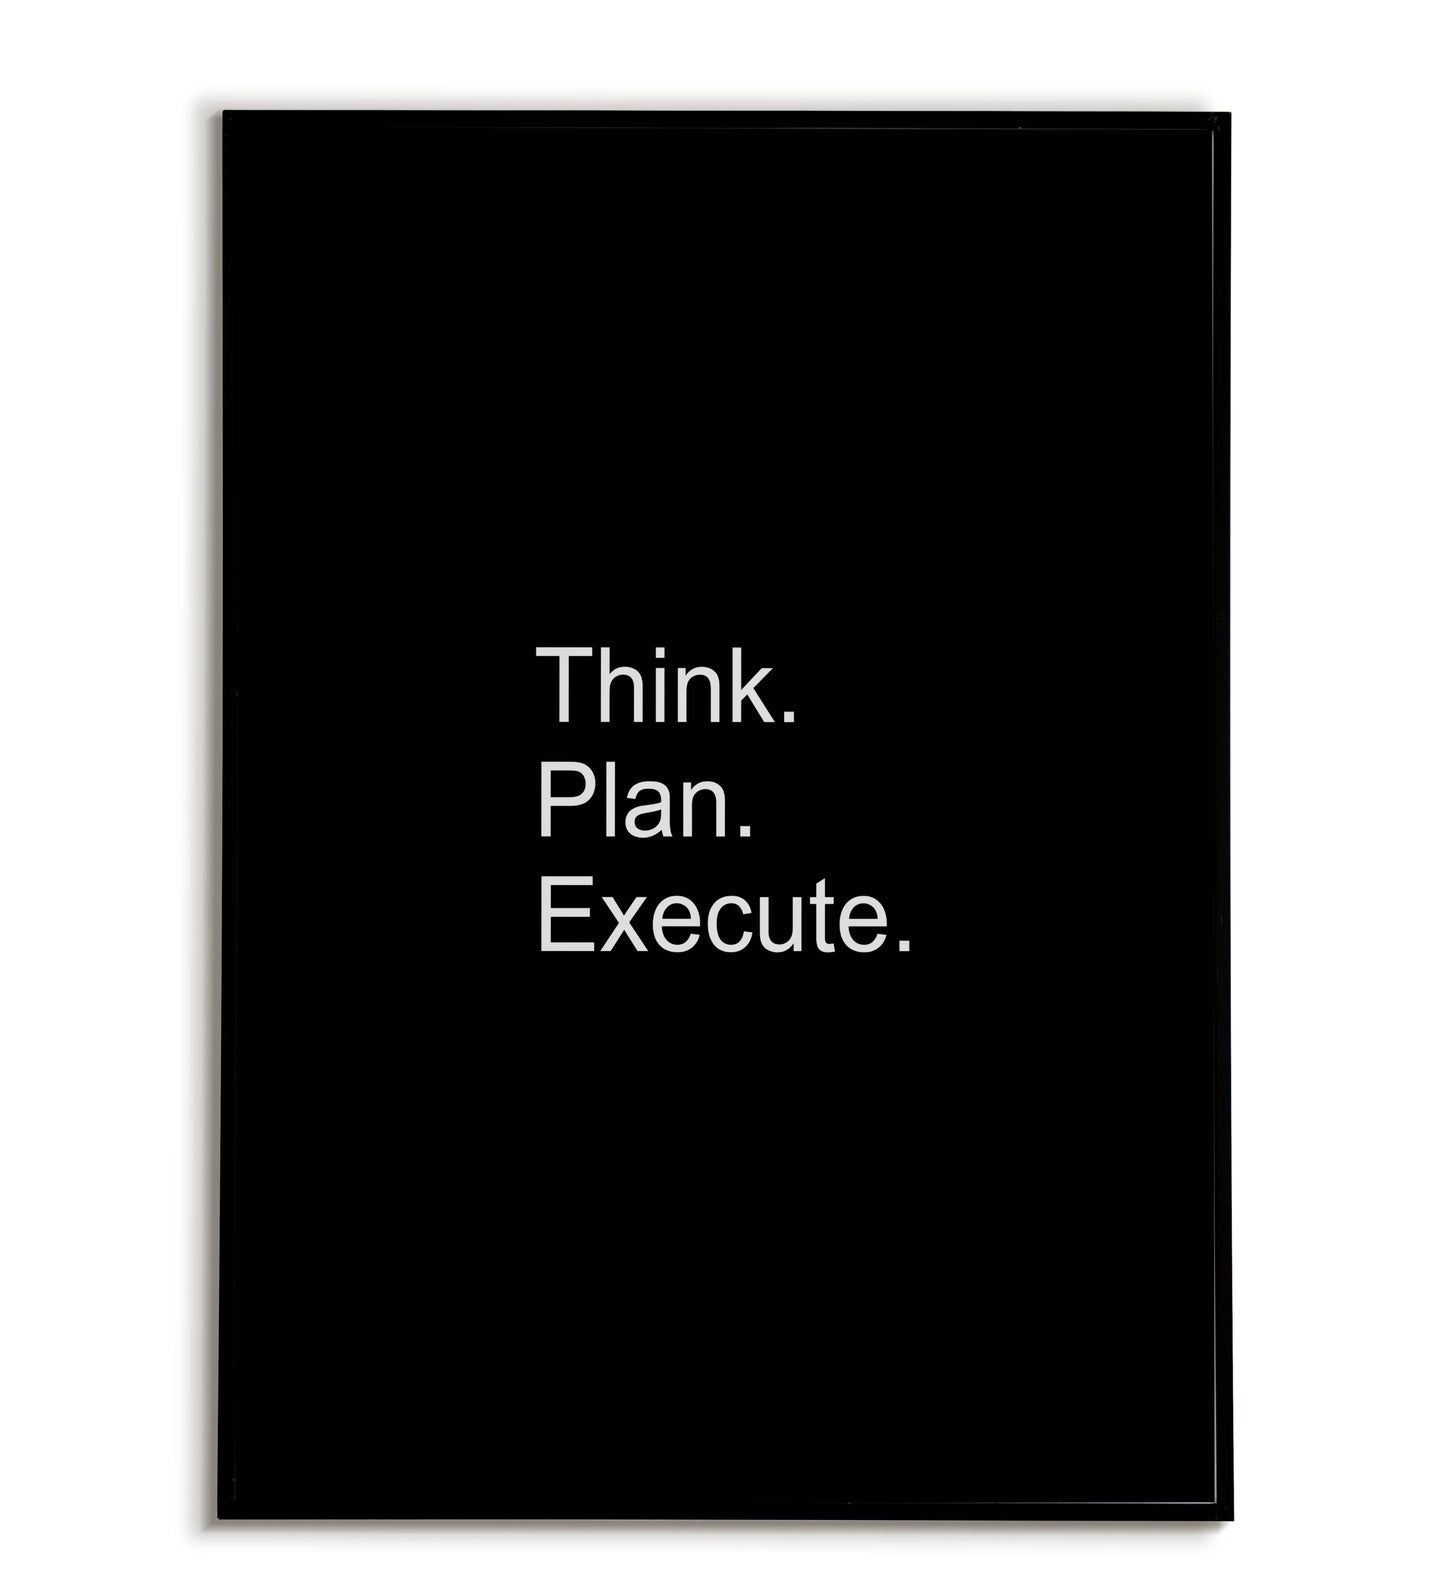 "Think. Plan. Execute." - Printable Wall Art / Poster. Download this design to guide your action steps.